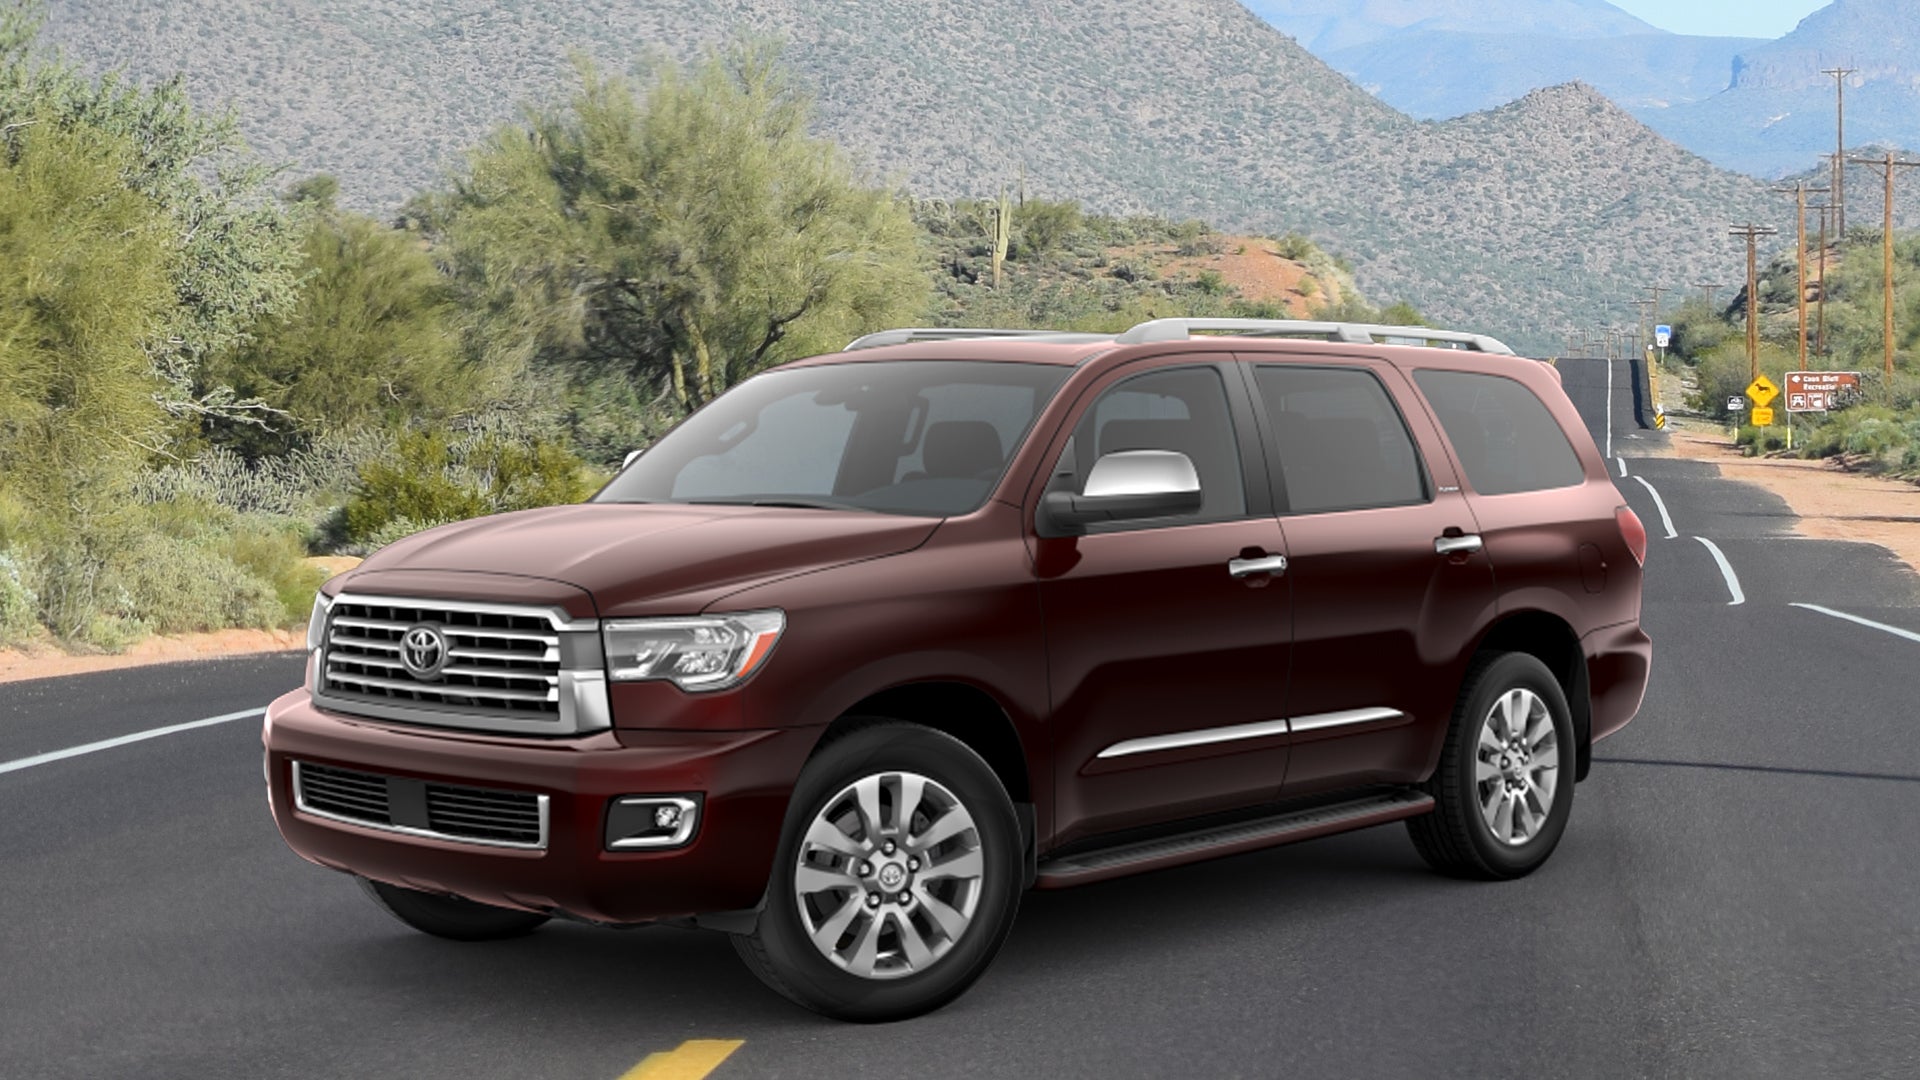 2018 Toyota Sequoia Test Drive Review: Big, Roomy, and Ready to Be Replaced  With a New SUV